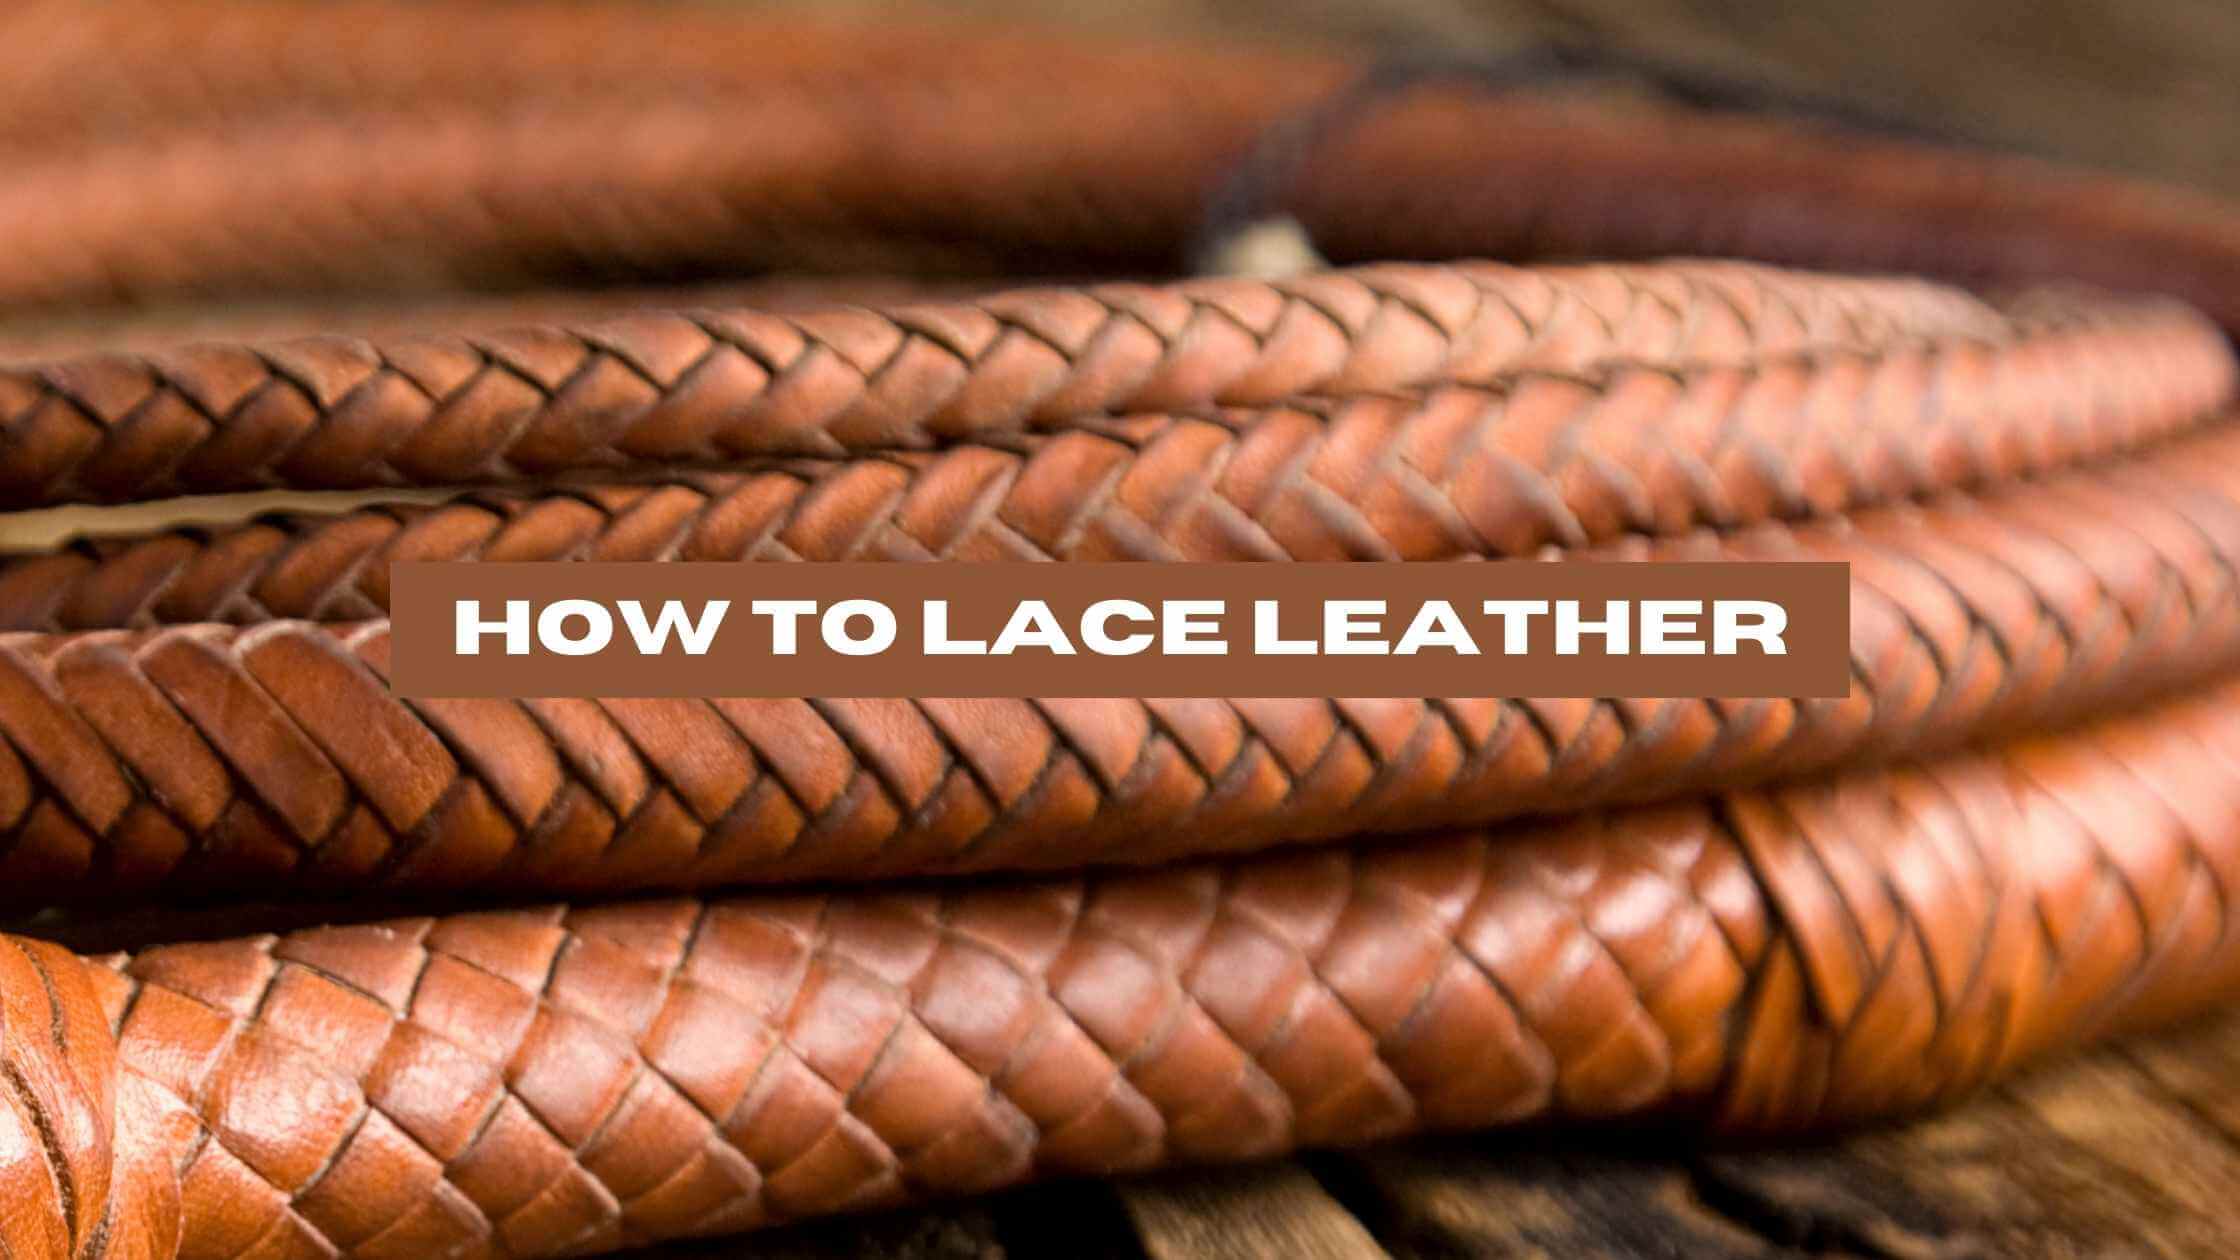 How to Lace Leather